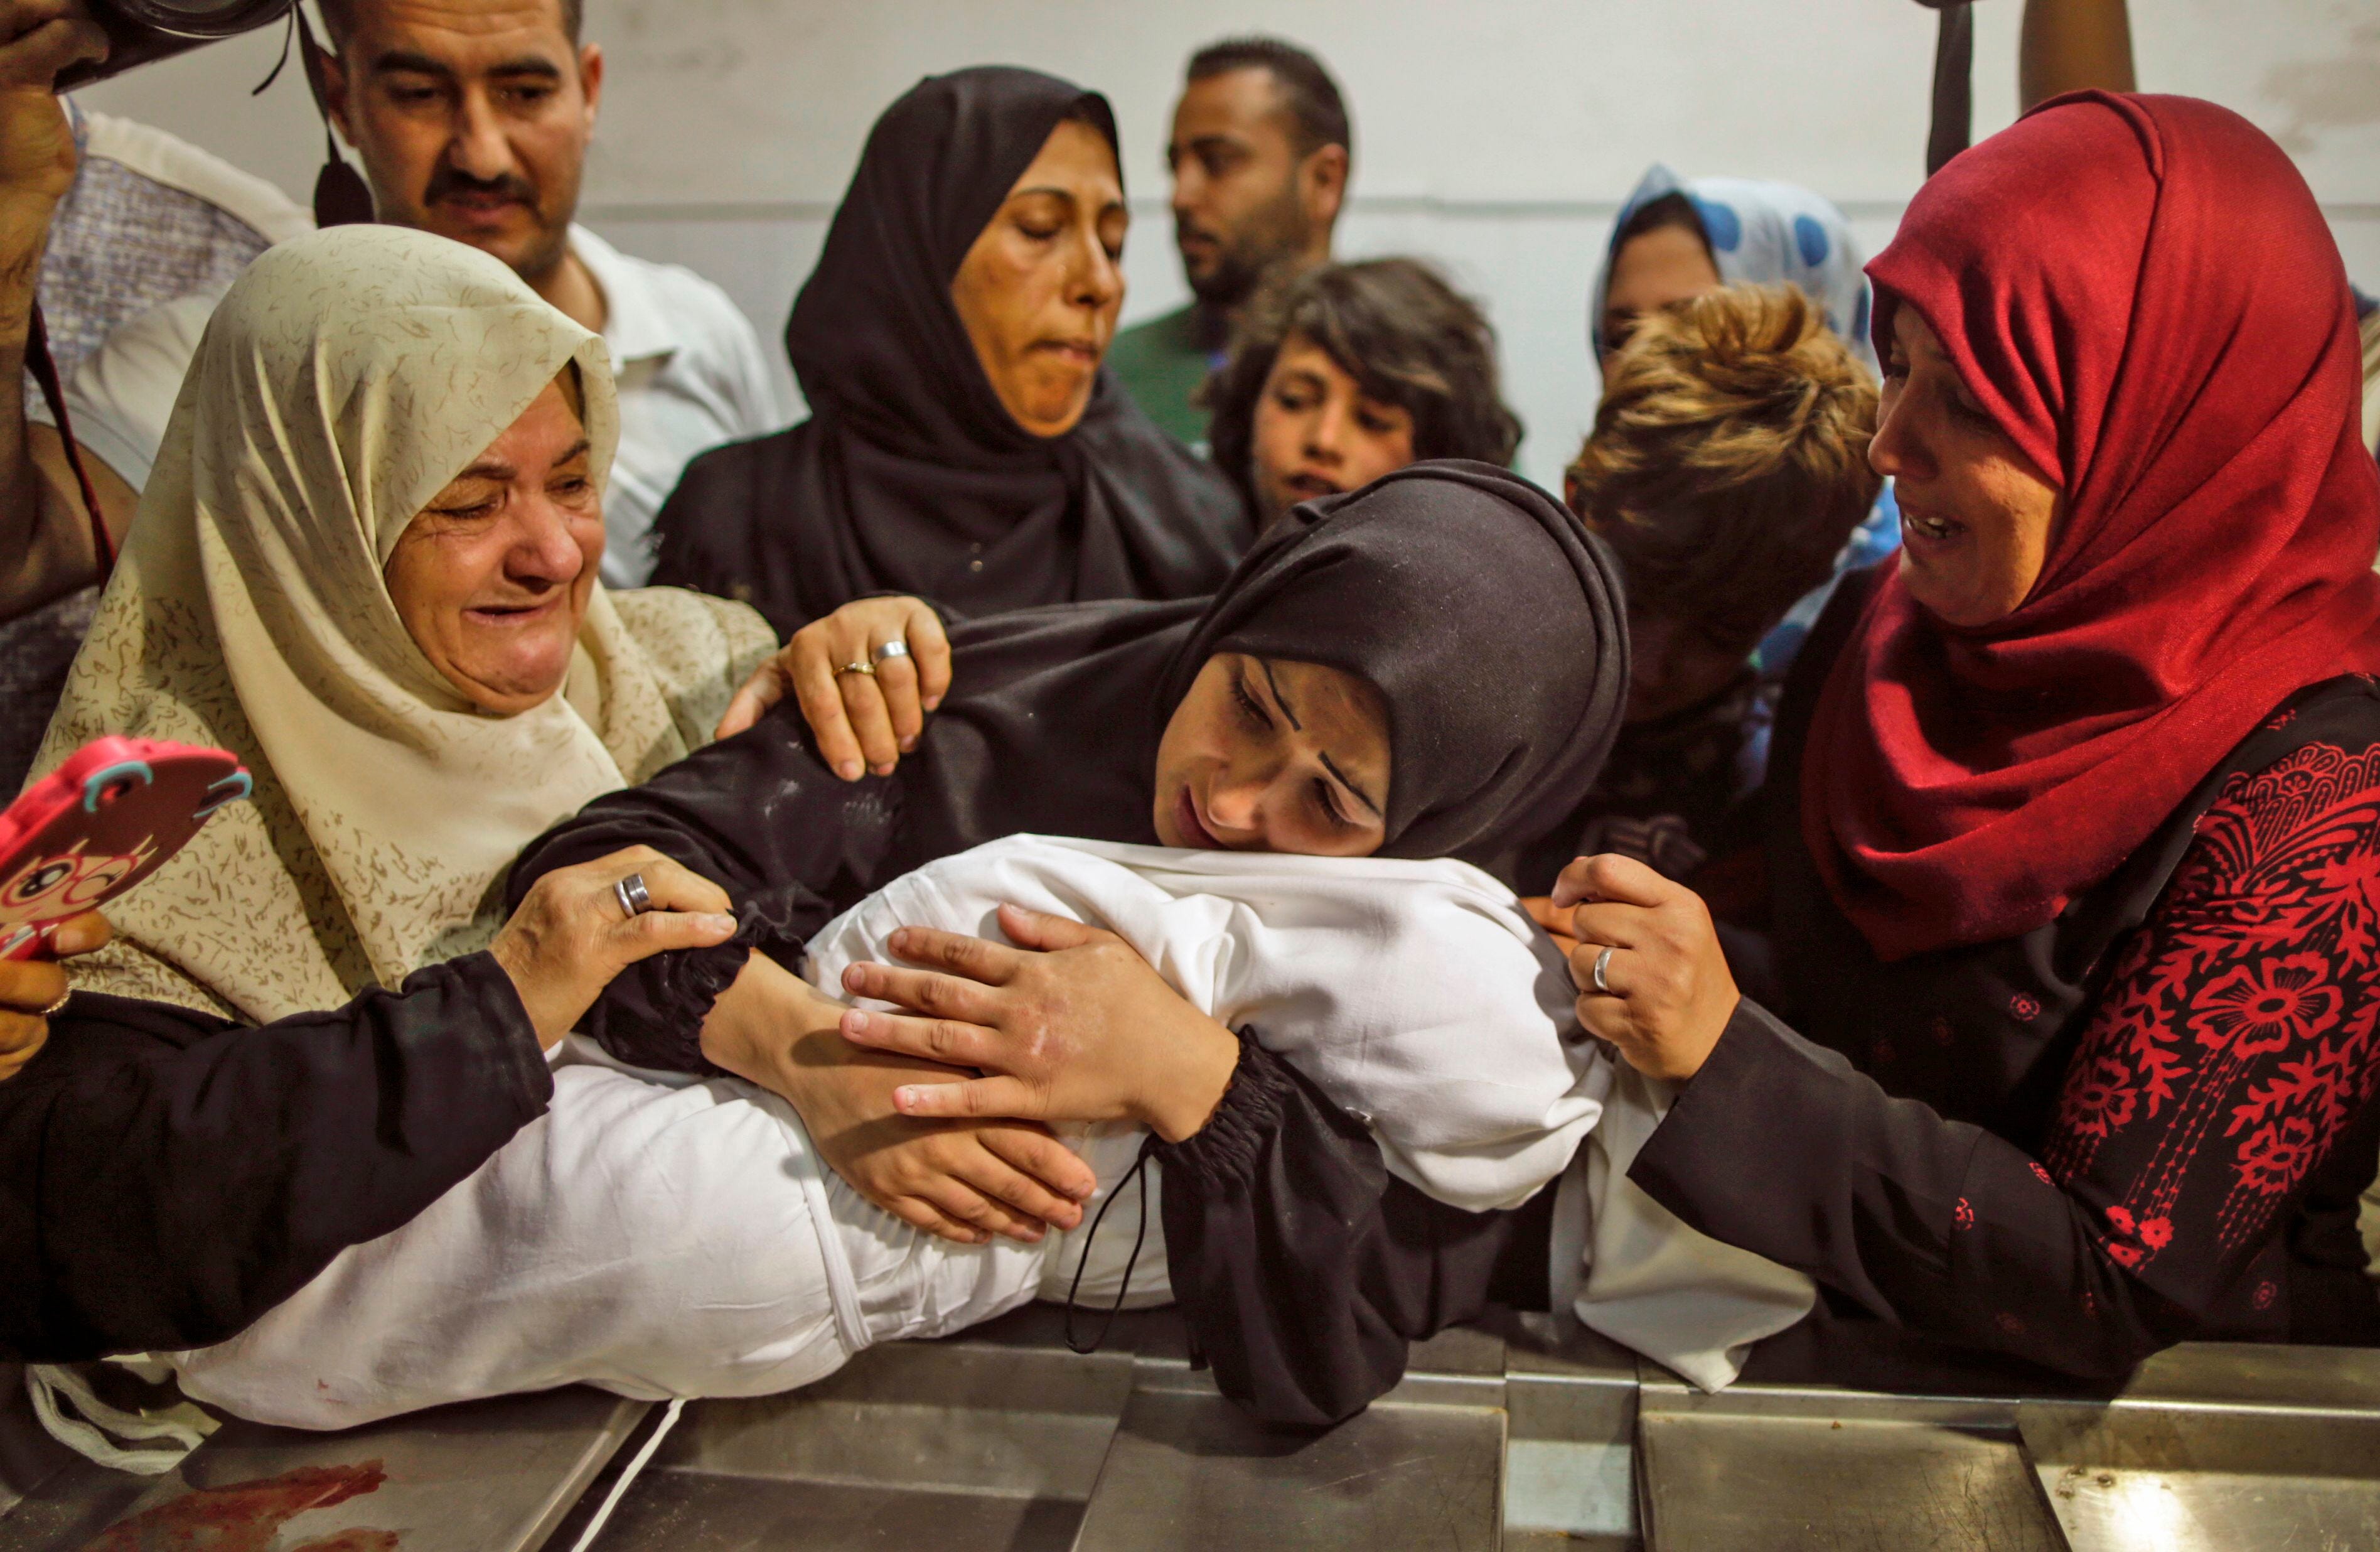 The mother of a Leila al-Ghandour (C), a Palestinian baby of 8 months who according to the Palestinian health ministry died of tear gas inhalation during clashes in East Gaza the previous day, holds her at the morgue of al-Shifa hospital in Gaza City